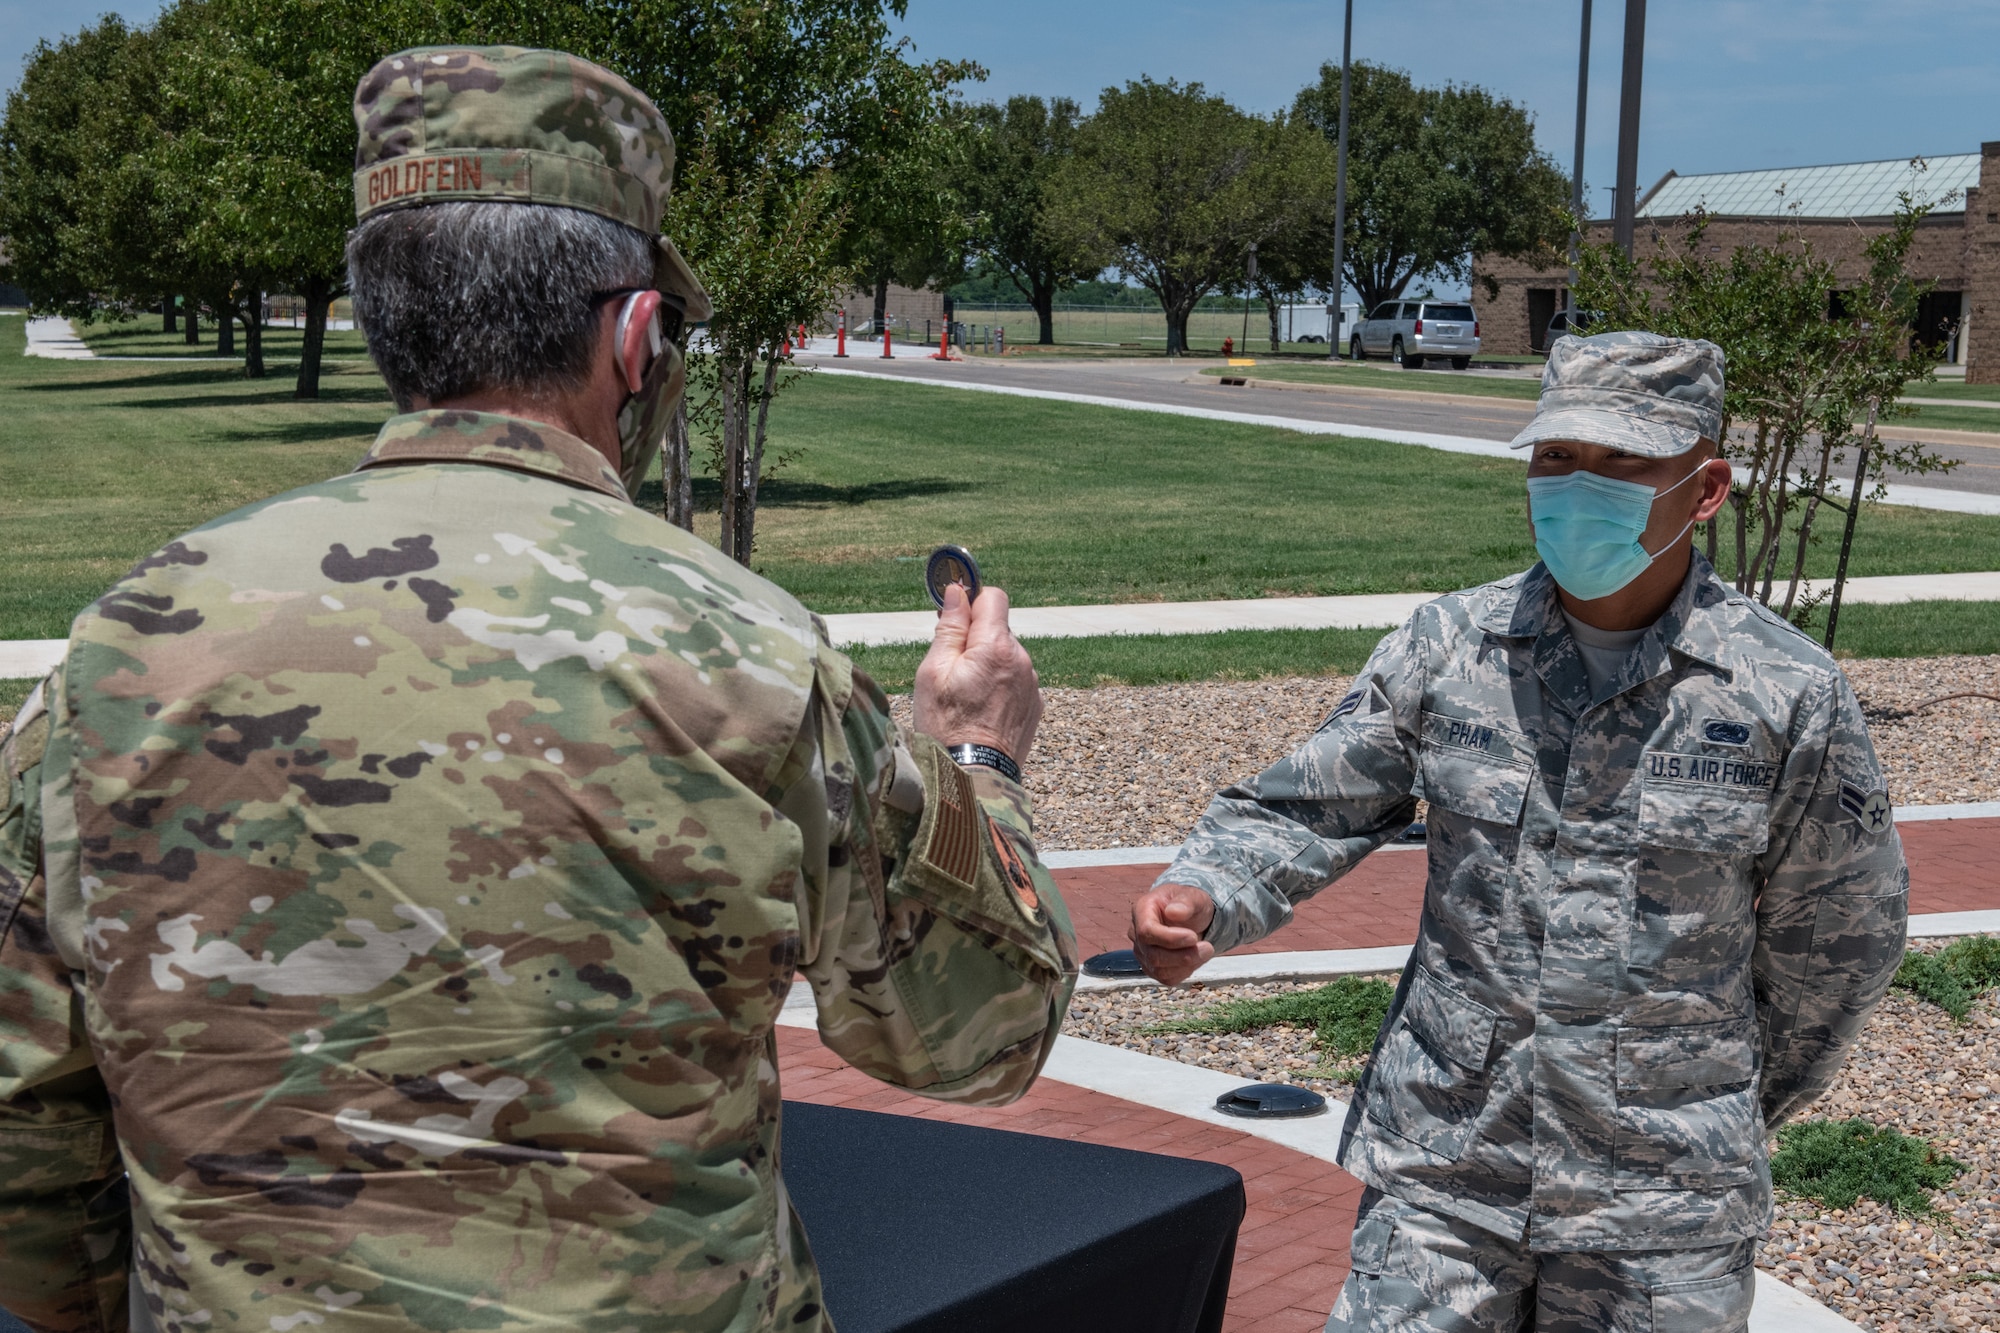 Air Force Chief of Staff Gen. David L. Goldfein coins Airman 1st Class Binh Pham, a radar, airfield and weather systems specialist for the 205th Engineering and Installation Squadron, during a base visit on June 8, 2020, at Will Rogers Air National Guard Base in Oklahoma City. Pham was nominated to receive a coin from Goldfein for his exceptional contributions as a Guardsman serving at the Regional Food Bank of Oklahoma during the state’s response to COVID-19.